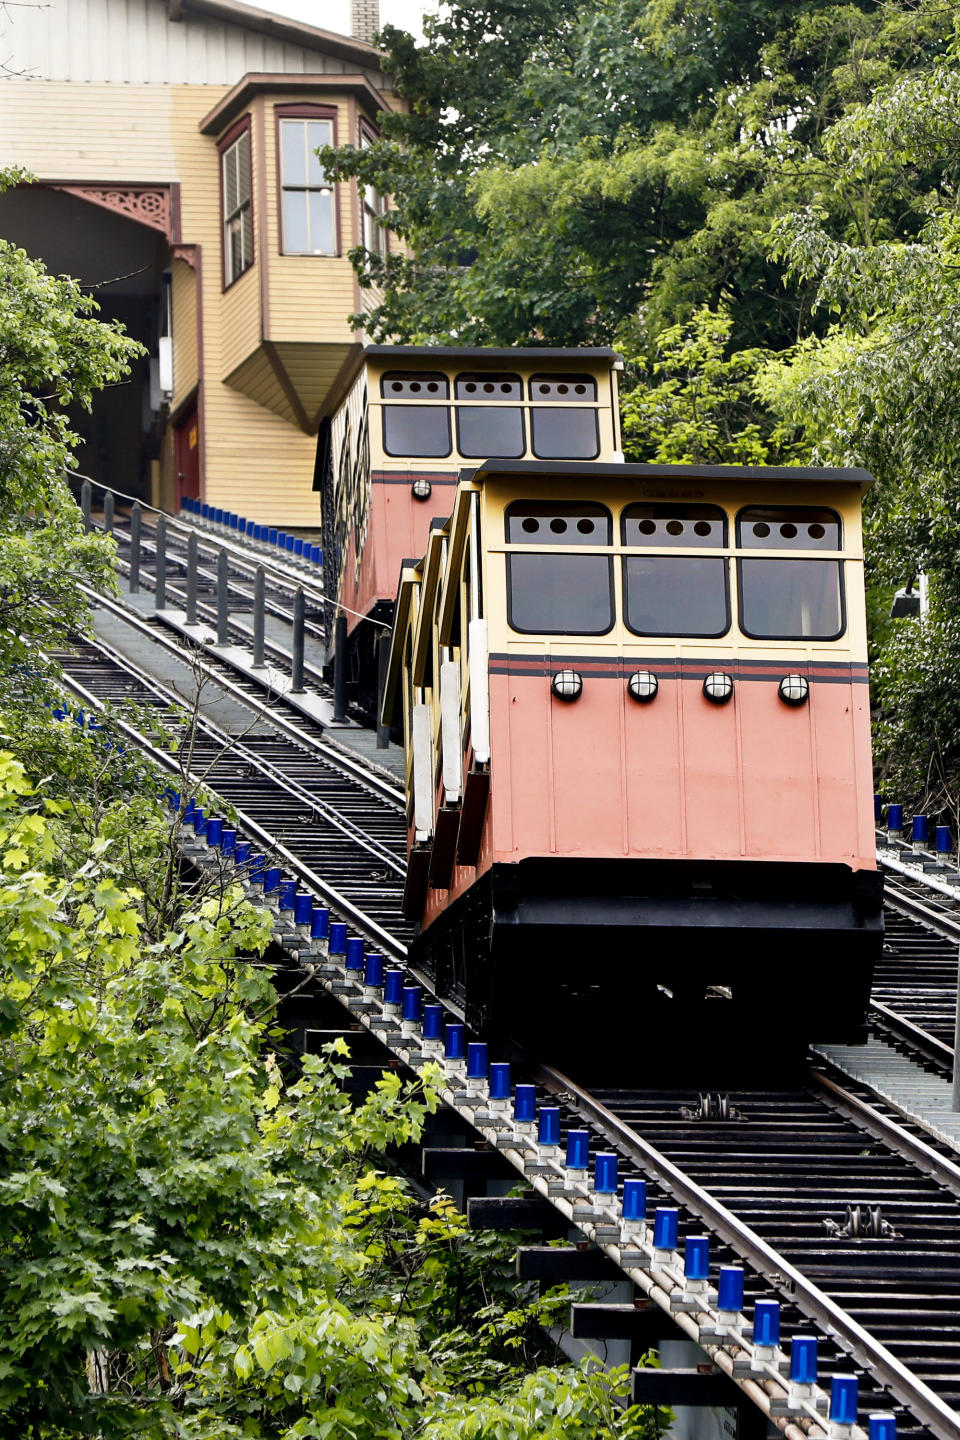 The cars for the Monongahela Incline pass on Friday, May 10, 2019, in Pittsburgh. The incline that transports people up and down the side of a hill in Pittsburgh reopened Friday after being closed since February. (AP Photo/Keith Srakocic)